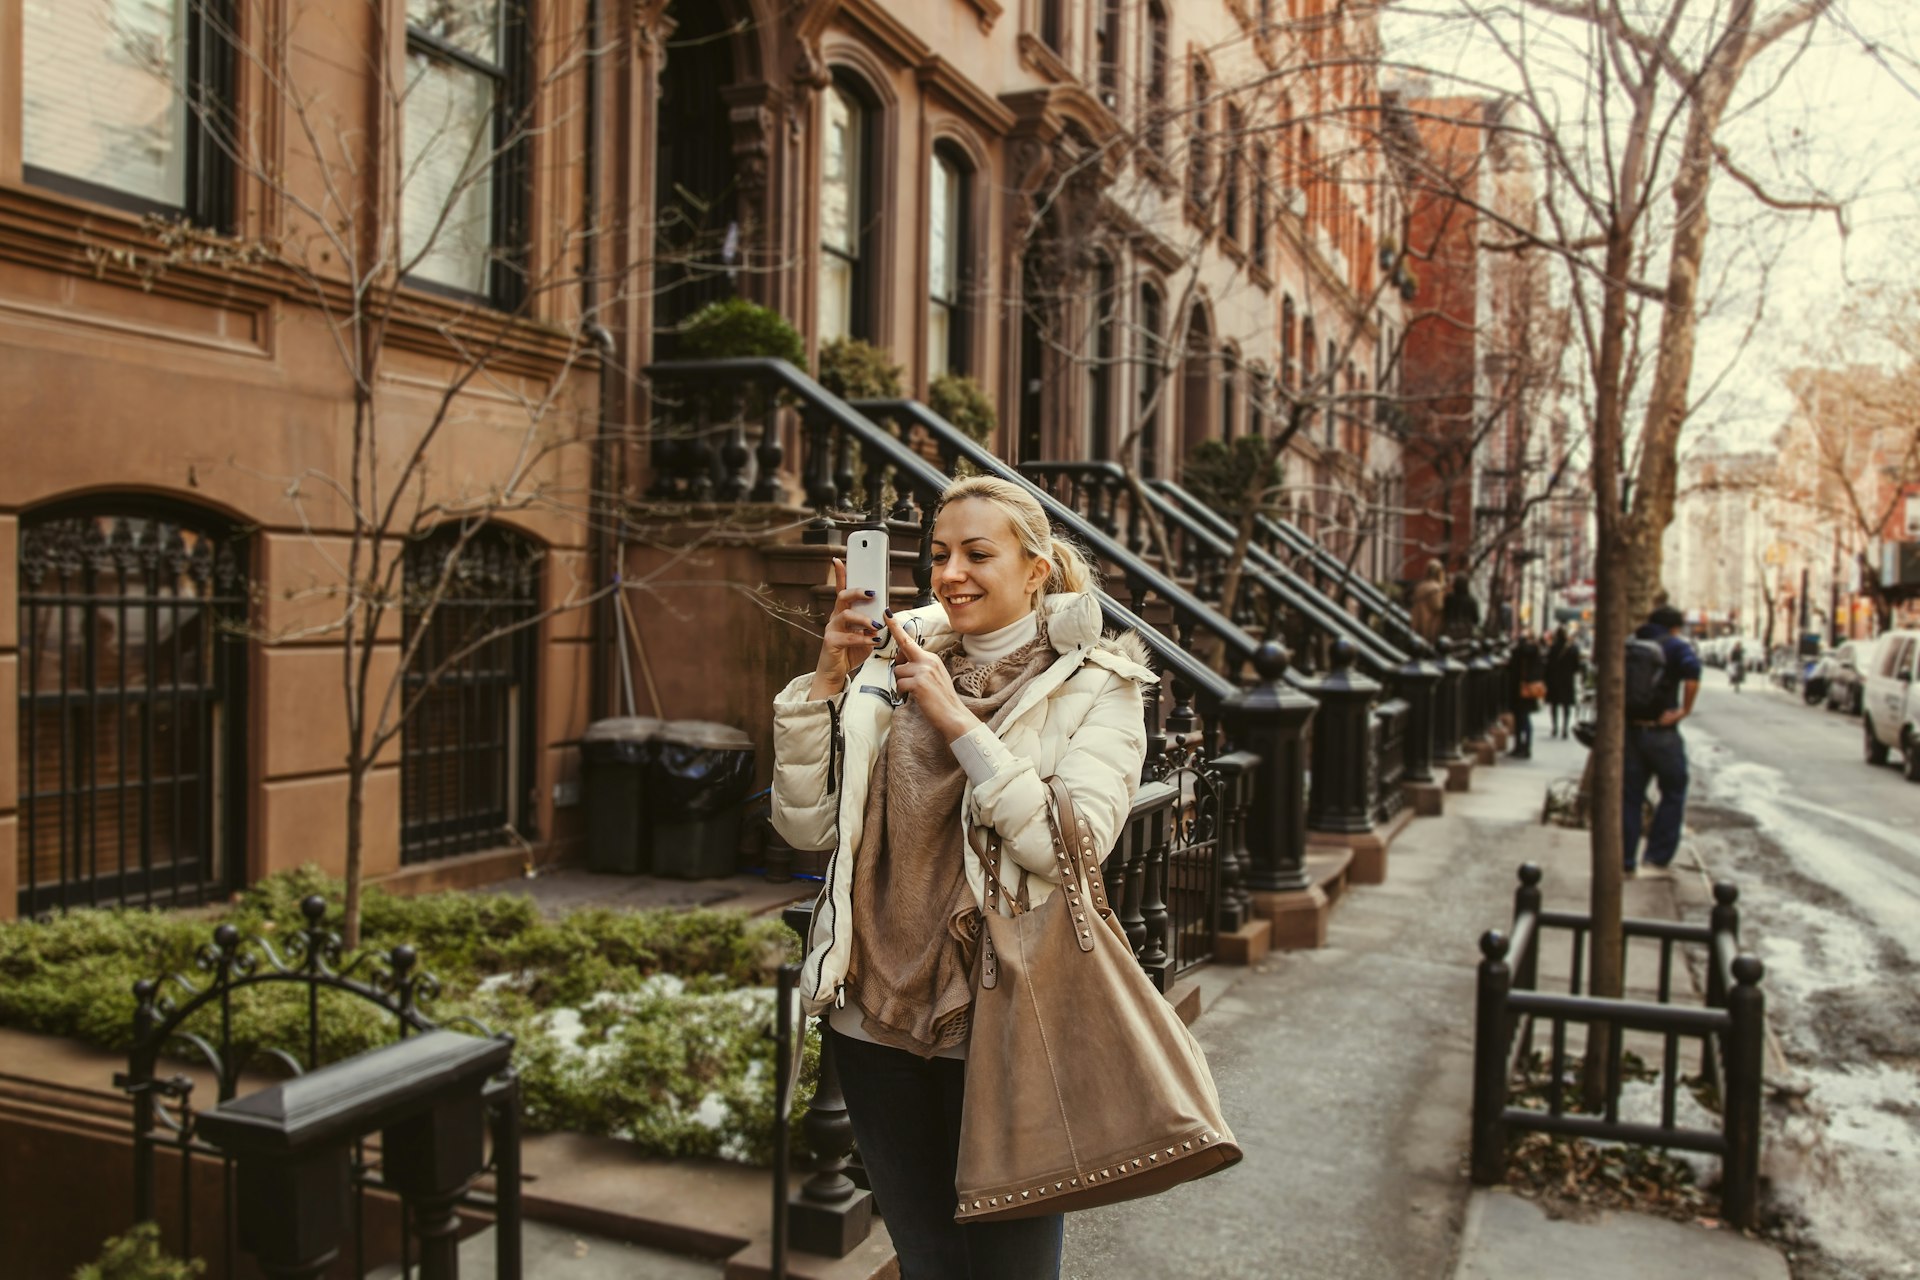 A woman takes a selfie on Perry St in the West Village, Greenwich Village, Manhattan, New York City, New York, USA